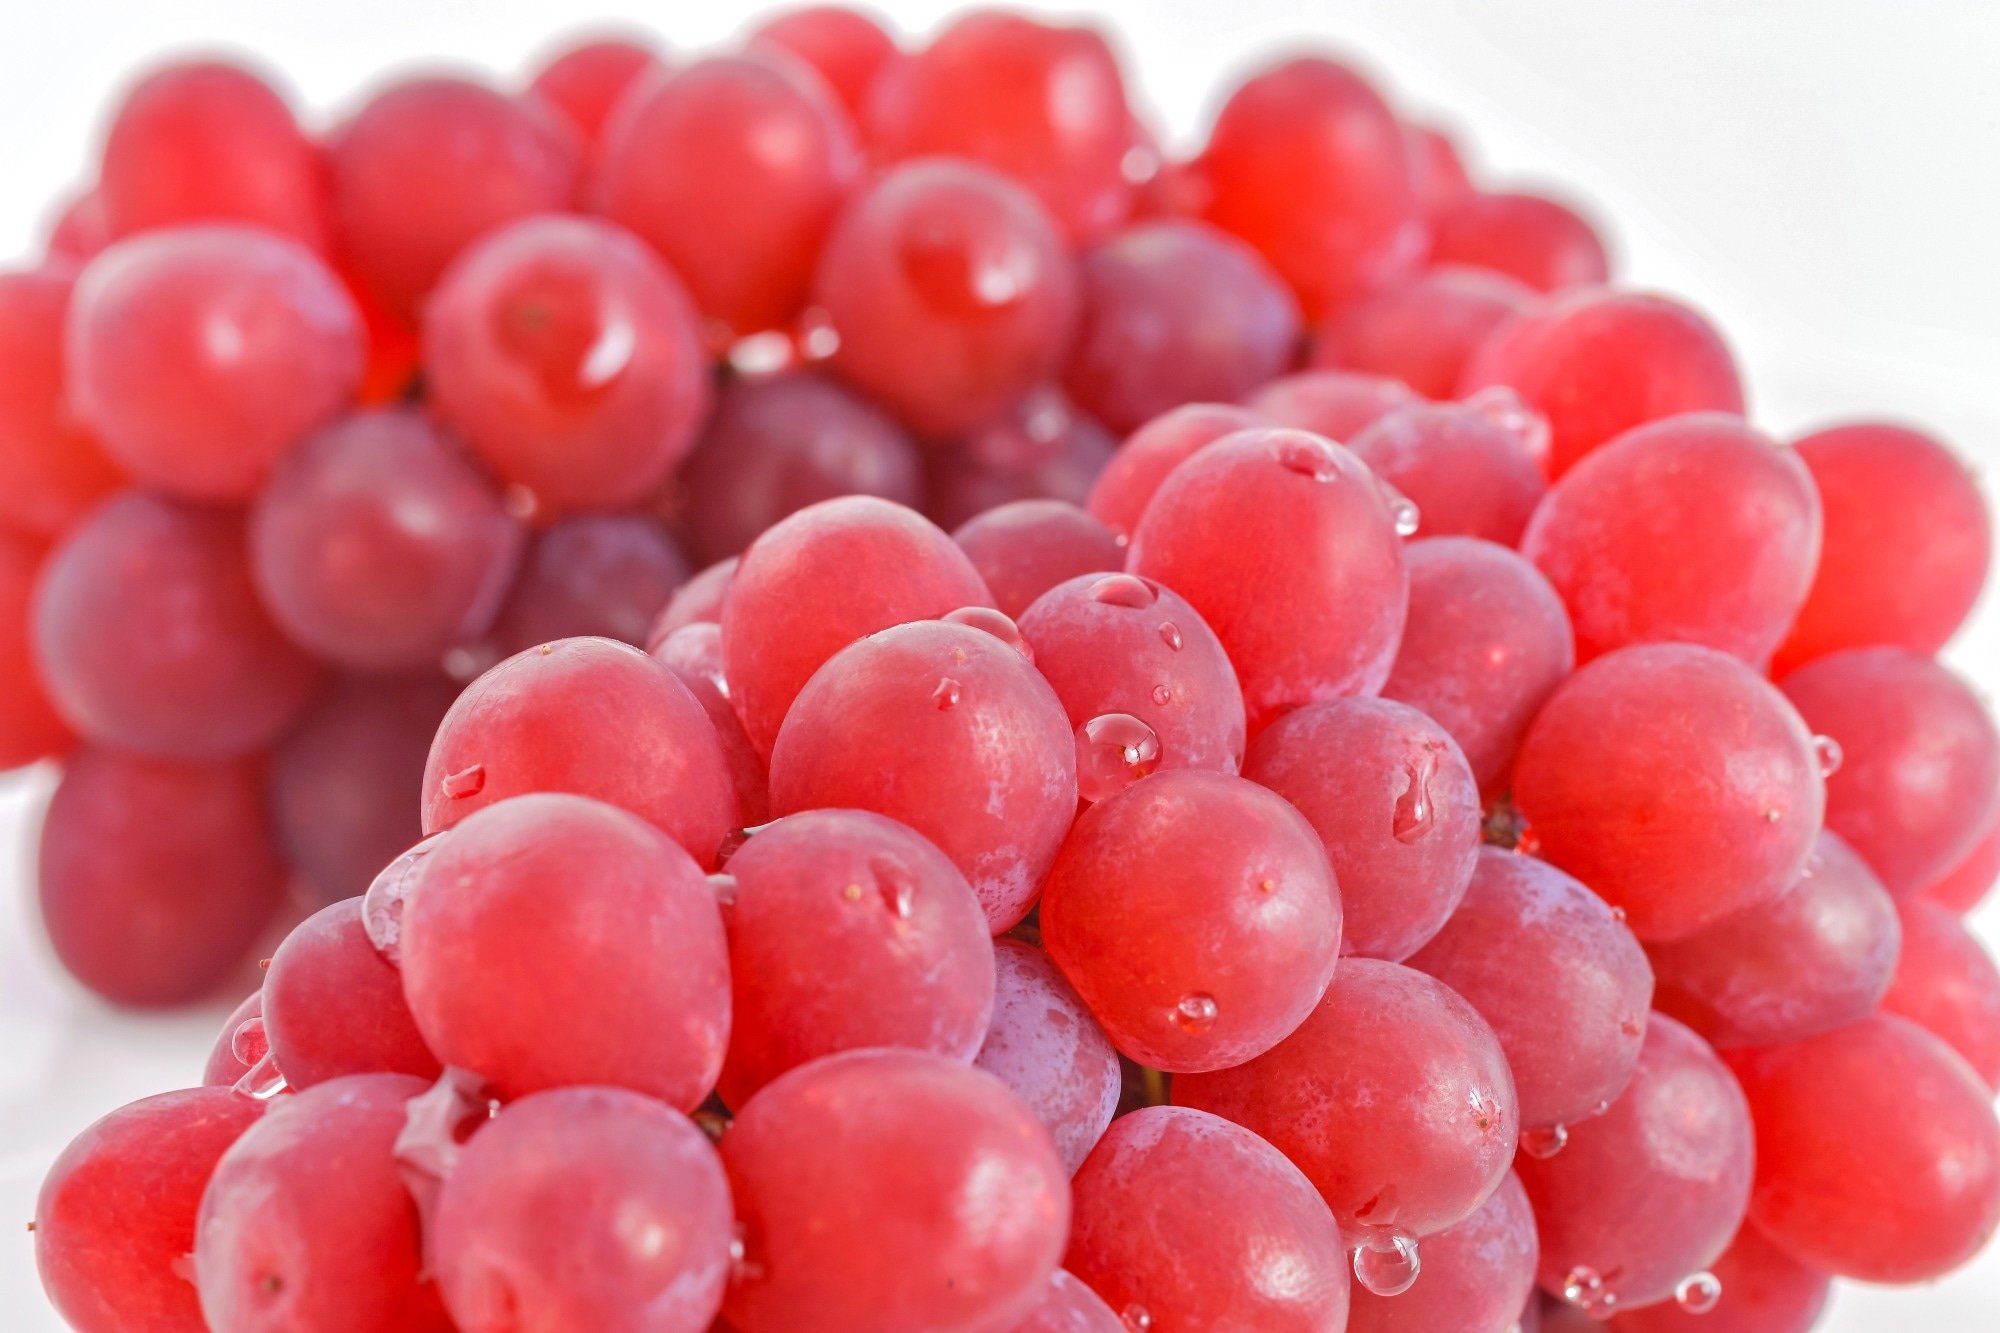 Research Paper: Adipose tissue angiogenesis genes are down-regulated by grape polyphenols supplementation during a human overfeeding trial. Image Credit: Basico / Shutterstock